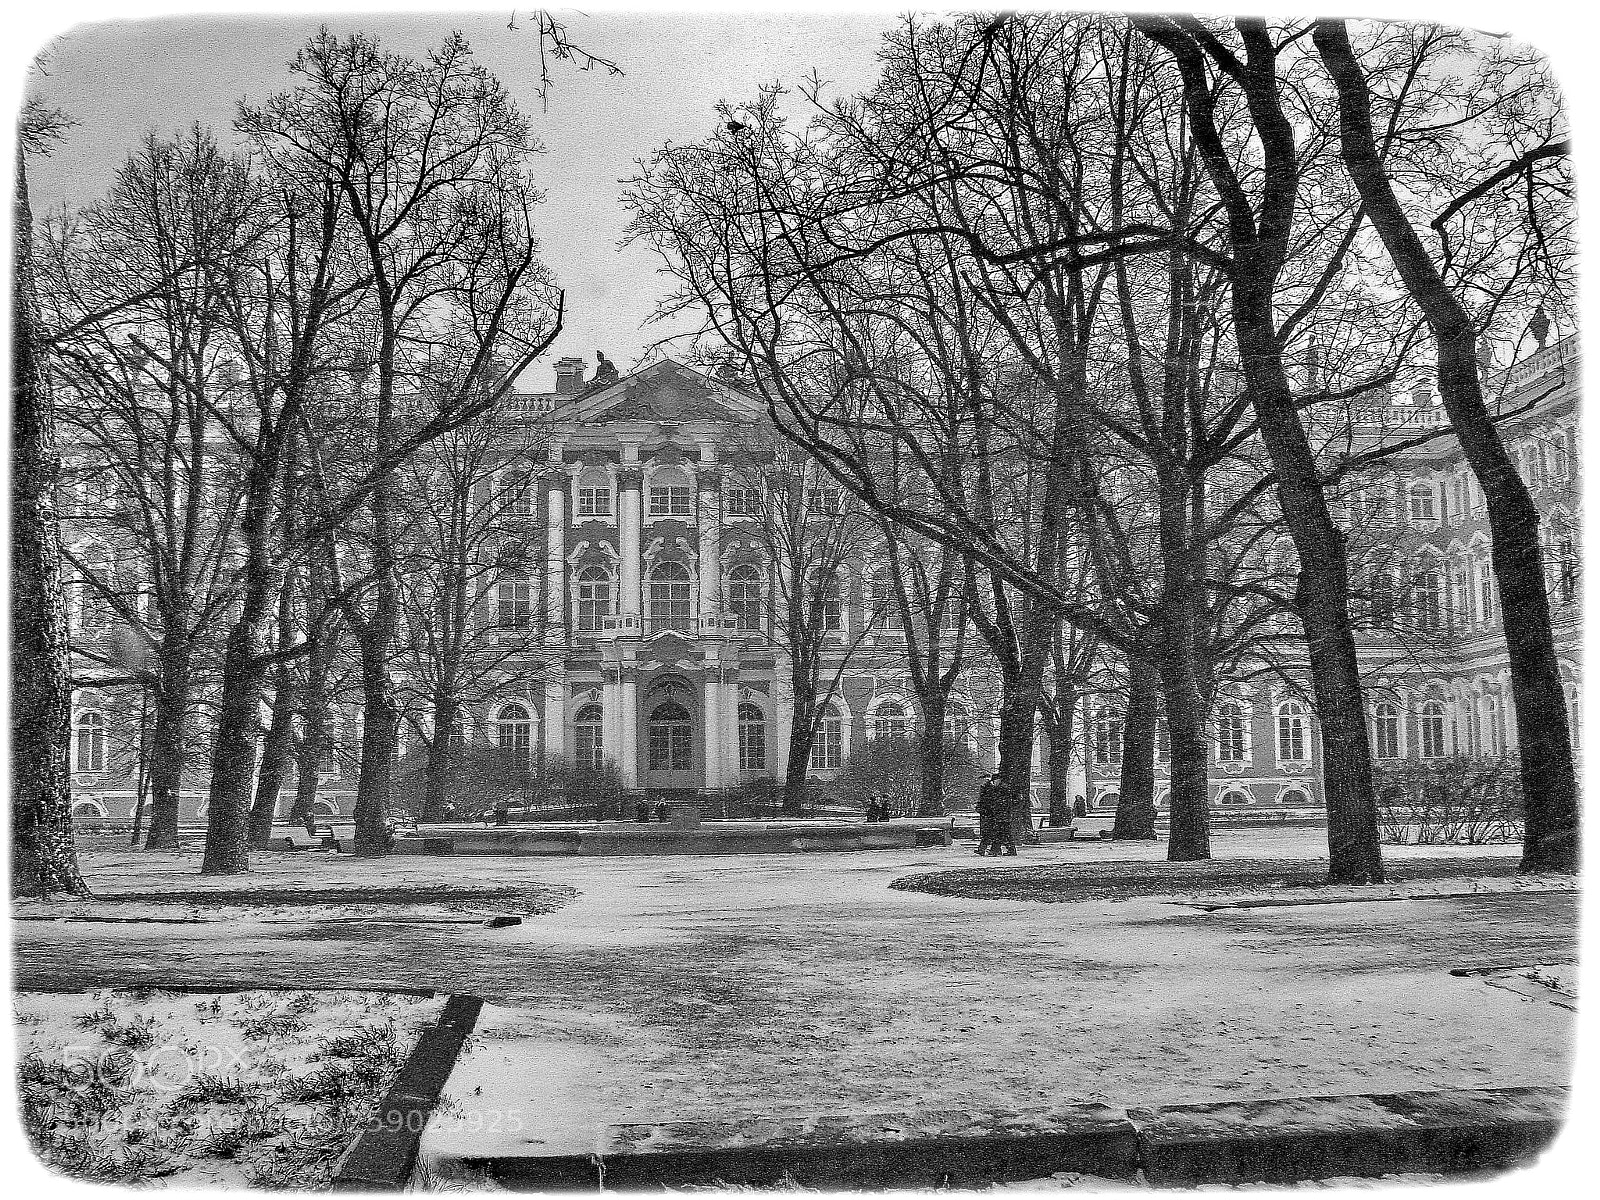 Canon POWERSHOT S5 IS sample photo. The hermitage, the winter photography